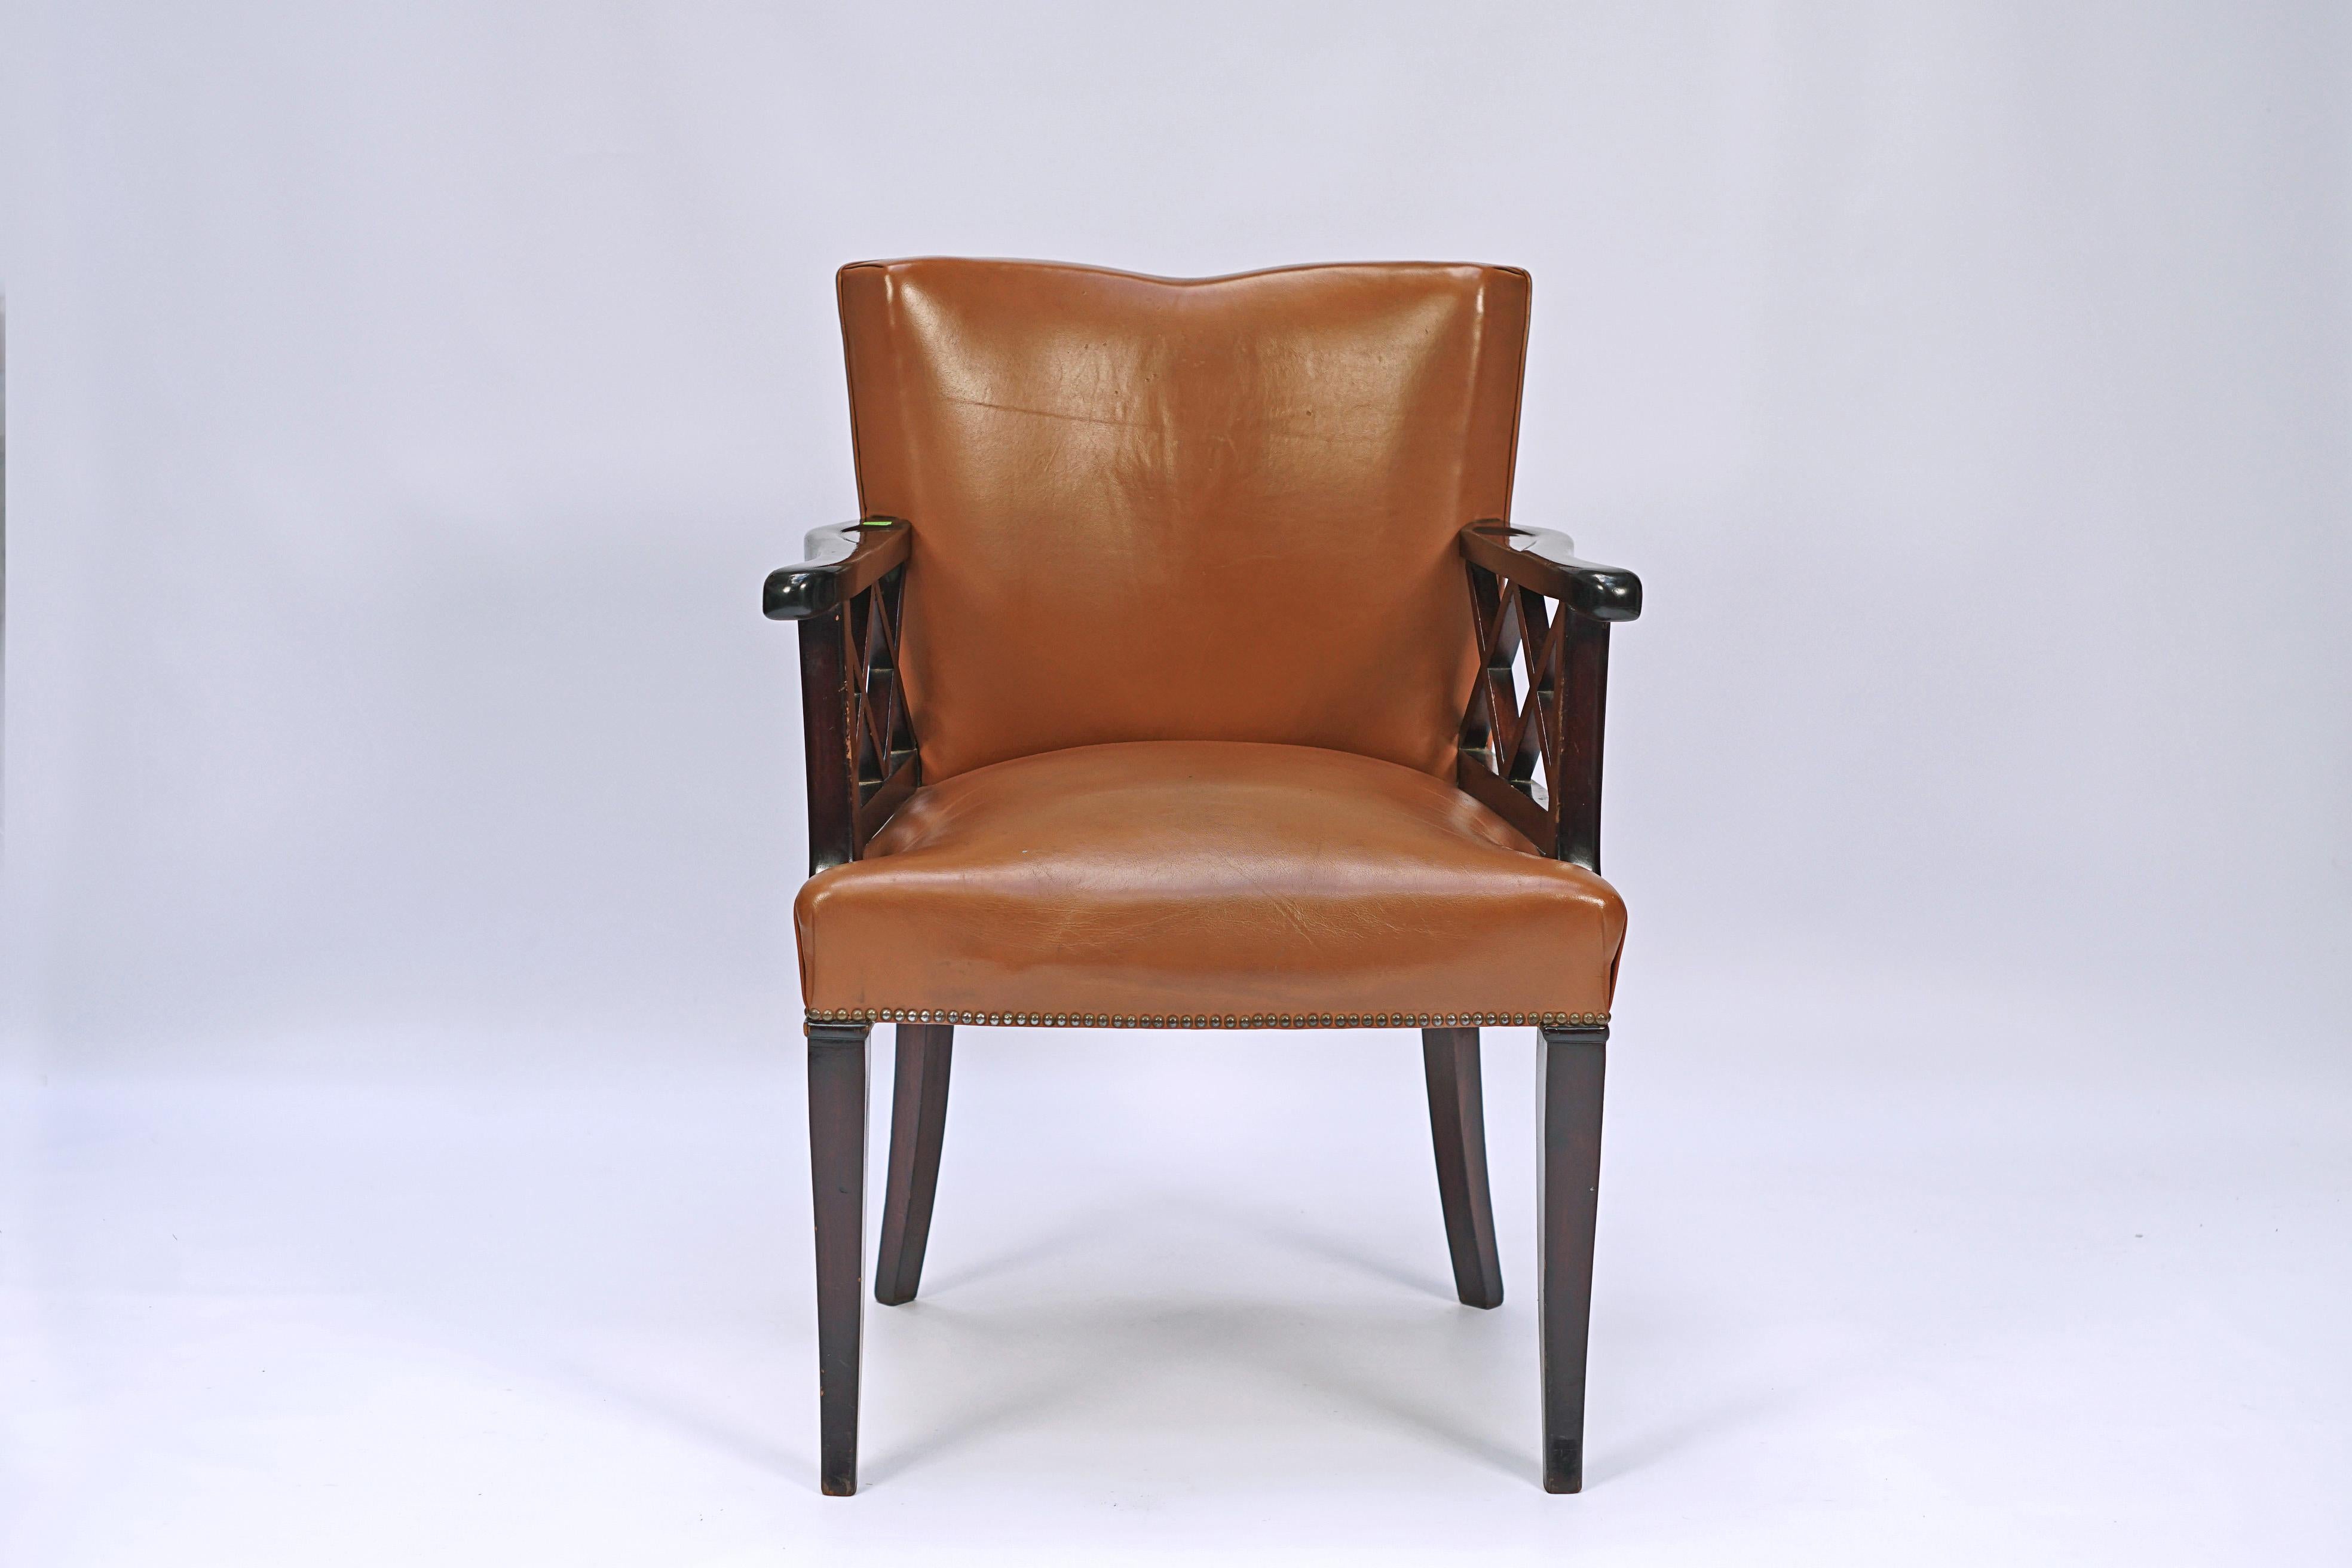 Art Deco armchair made of mahogany wood and leather upholstery.

France, circa 1940.